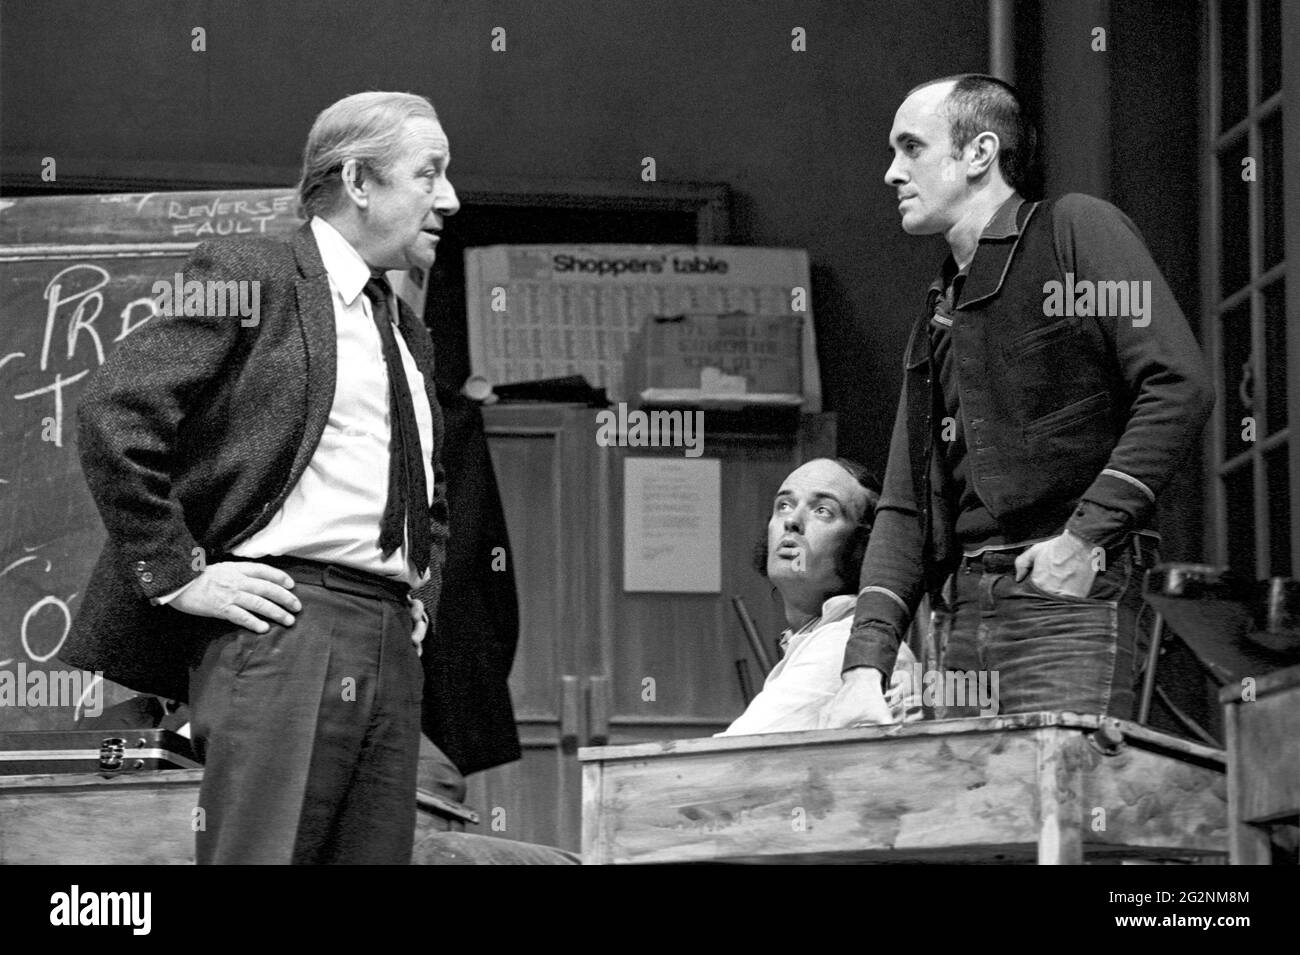 l-r: Jimmy Jewel (Eddie Waters), Dave Hill (Ged Murray), Jonathan Pryce (Gethin Price) in COMEDIANS by Trevor Griffiths at the National Theatre (NT), Old Vic Theatre, London SE1  24/09/1975  a Nottingham Playhouse production  design: John Gunter lighting: Rory Dempster director: Richard Eyre Stock Photo